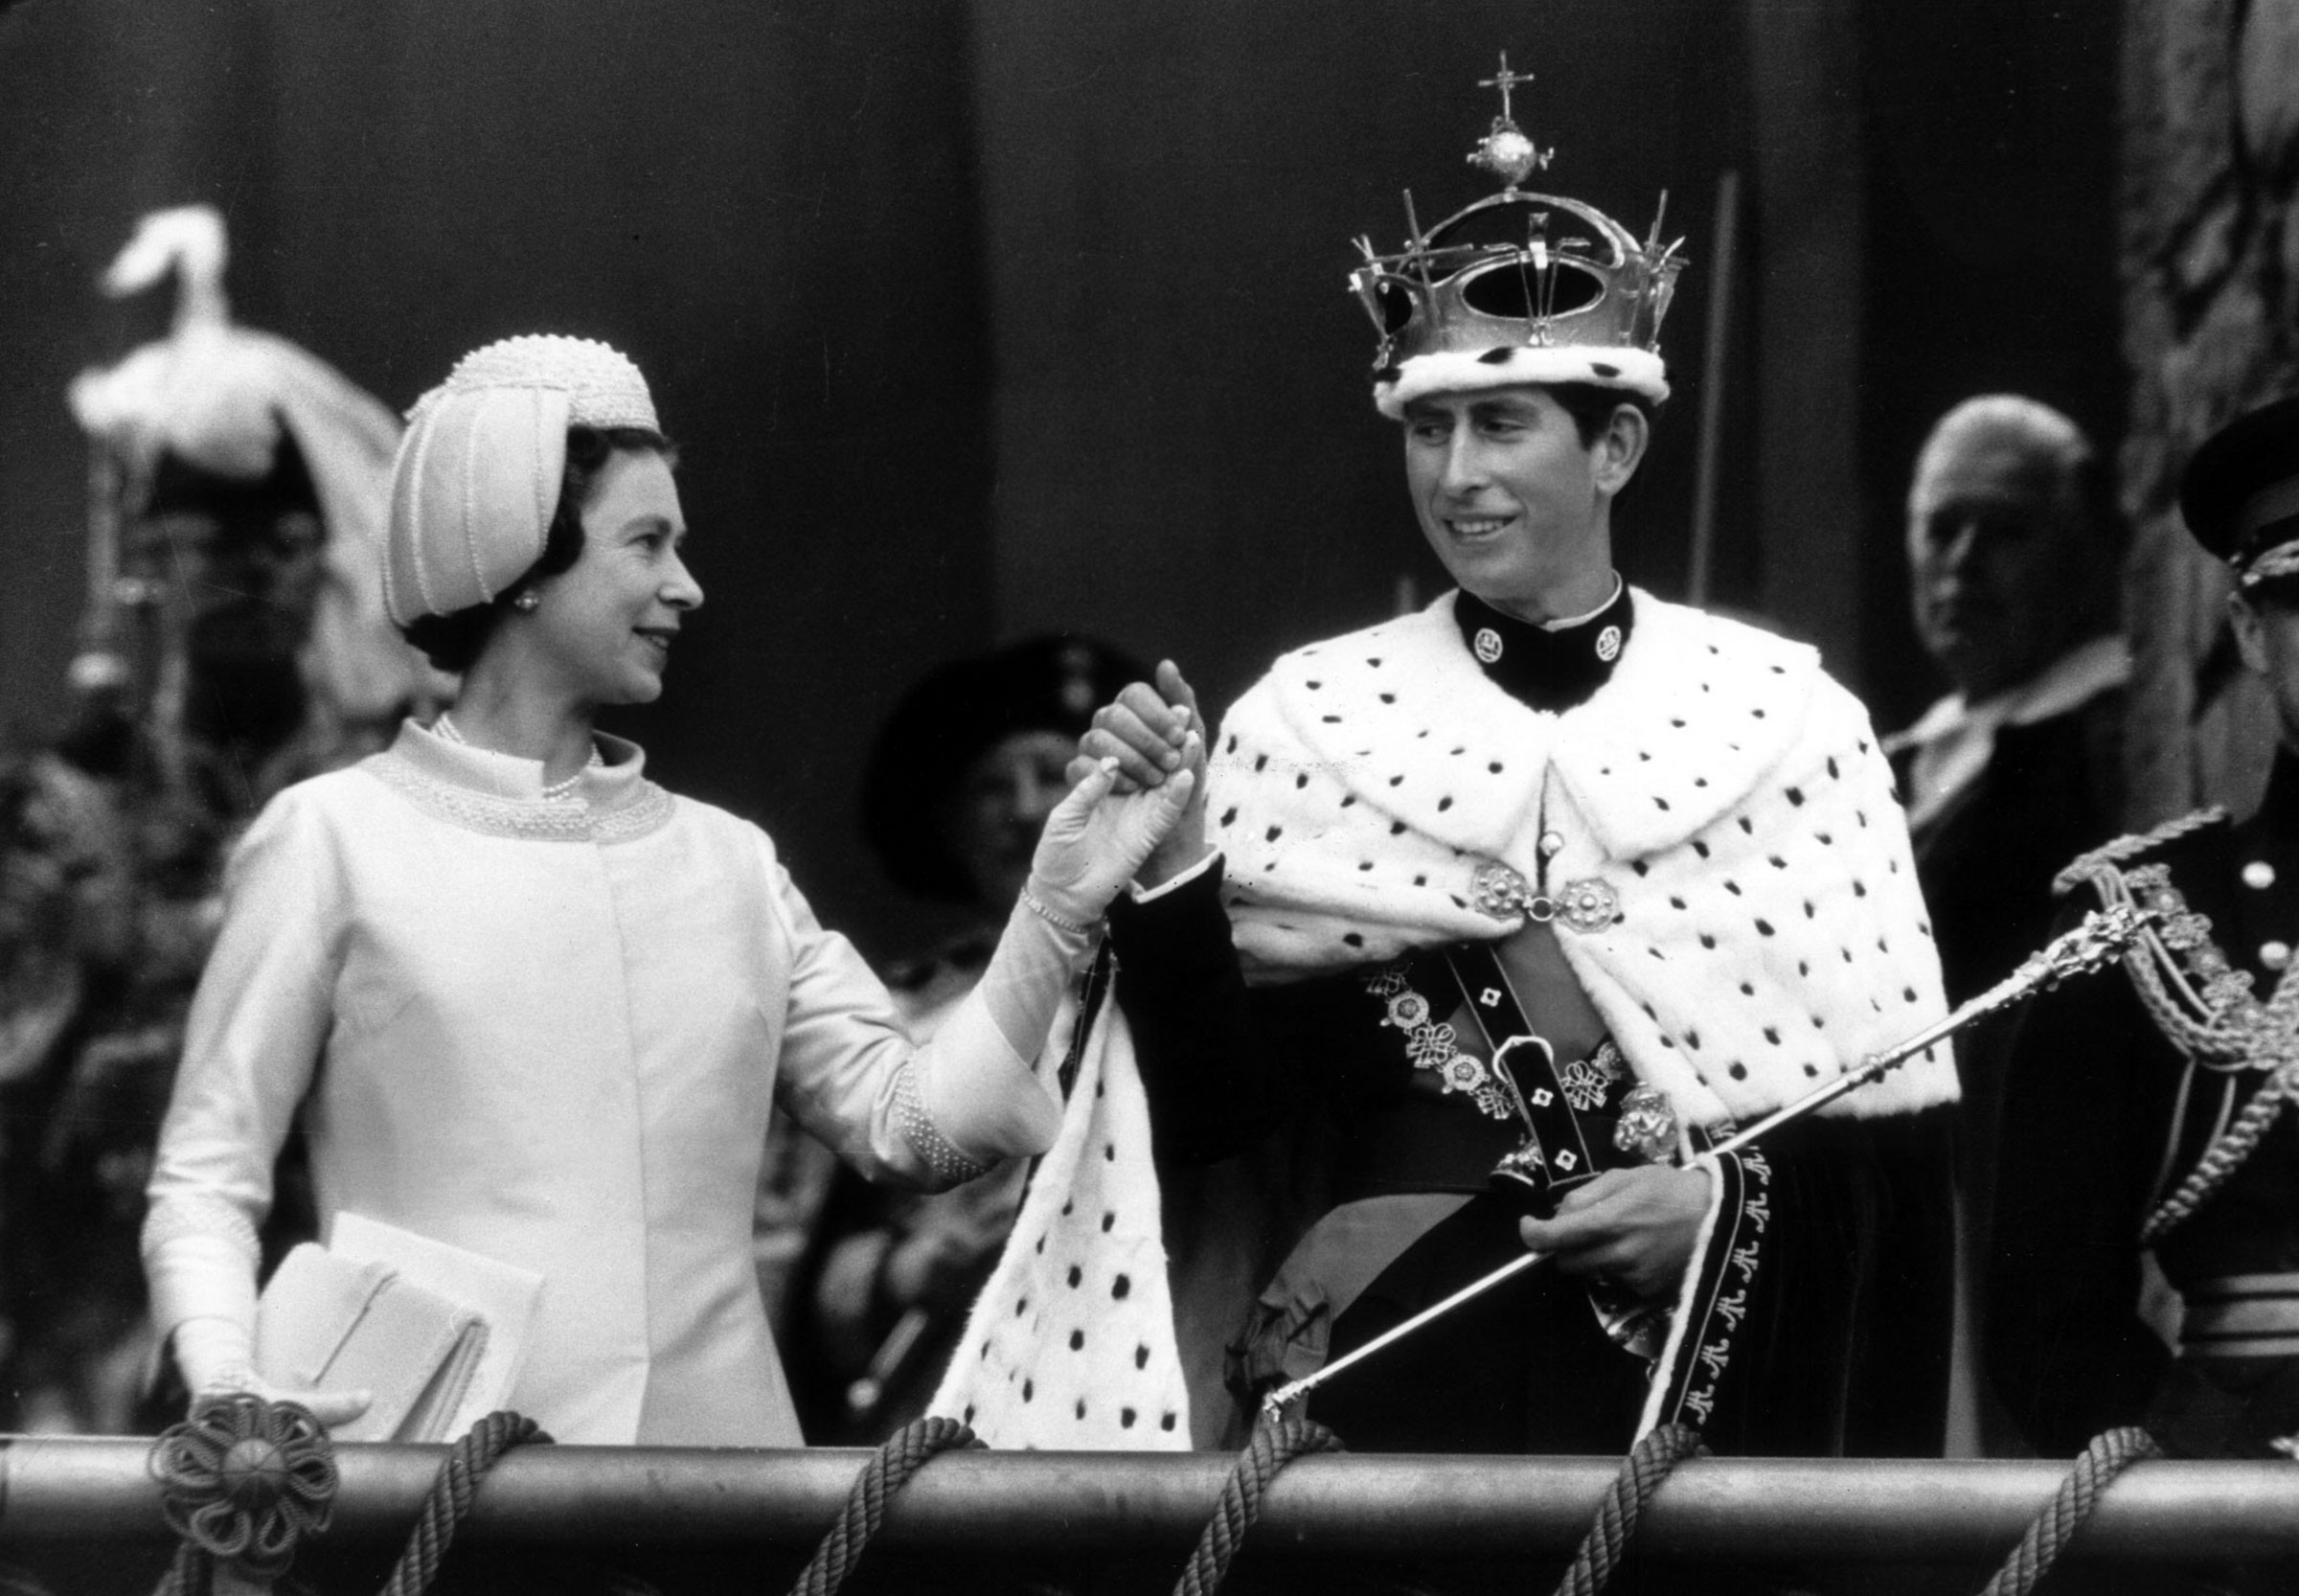 Queen Elizabeth II with her son Charles during his investiture as Prince of Wales on July 1, 1969 in Caernarvon, Wales. (Arthur Sidey—Daily Mirror/Mirrorpix/Getty Images)